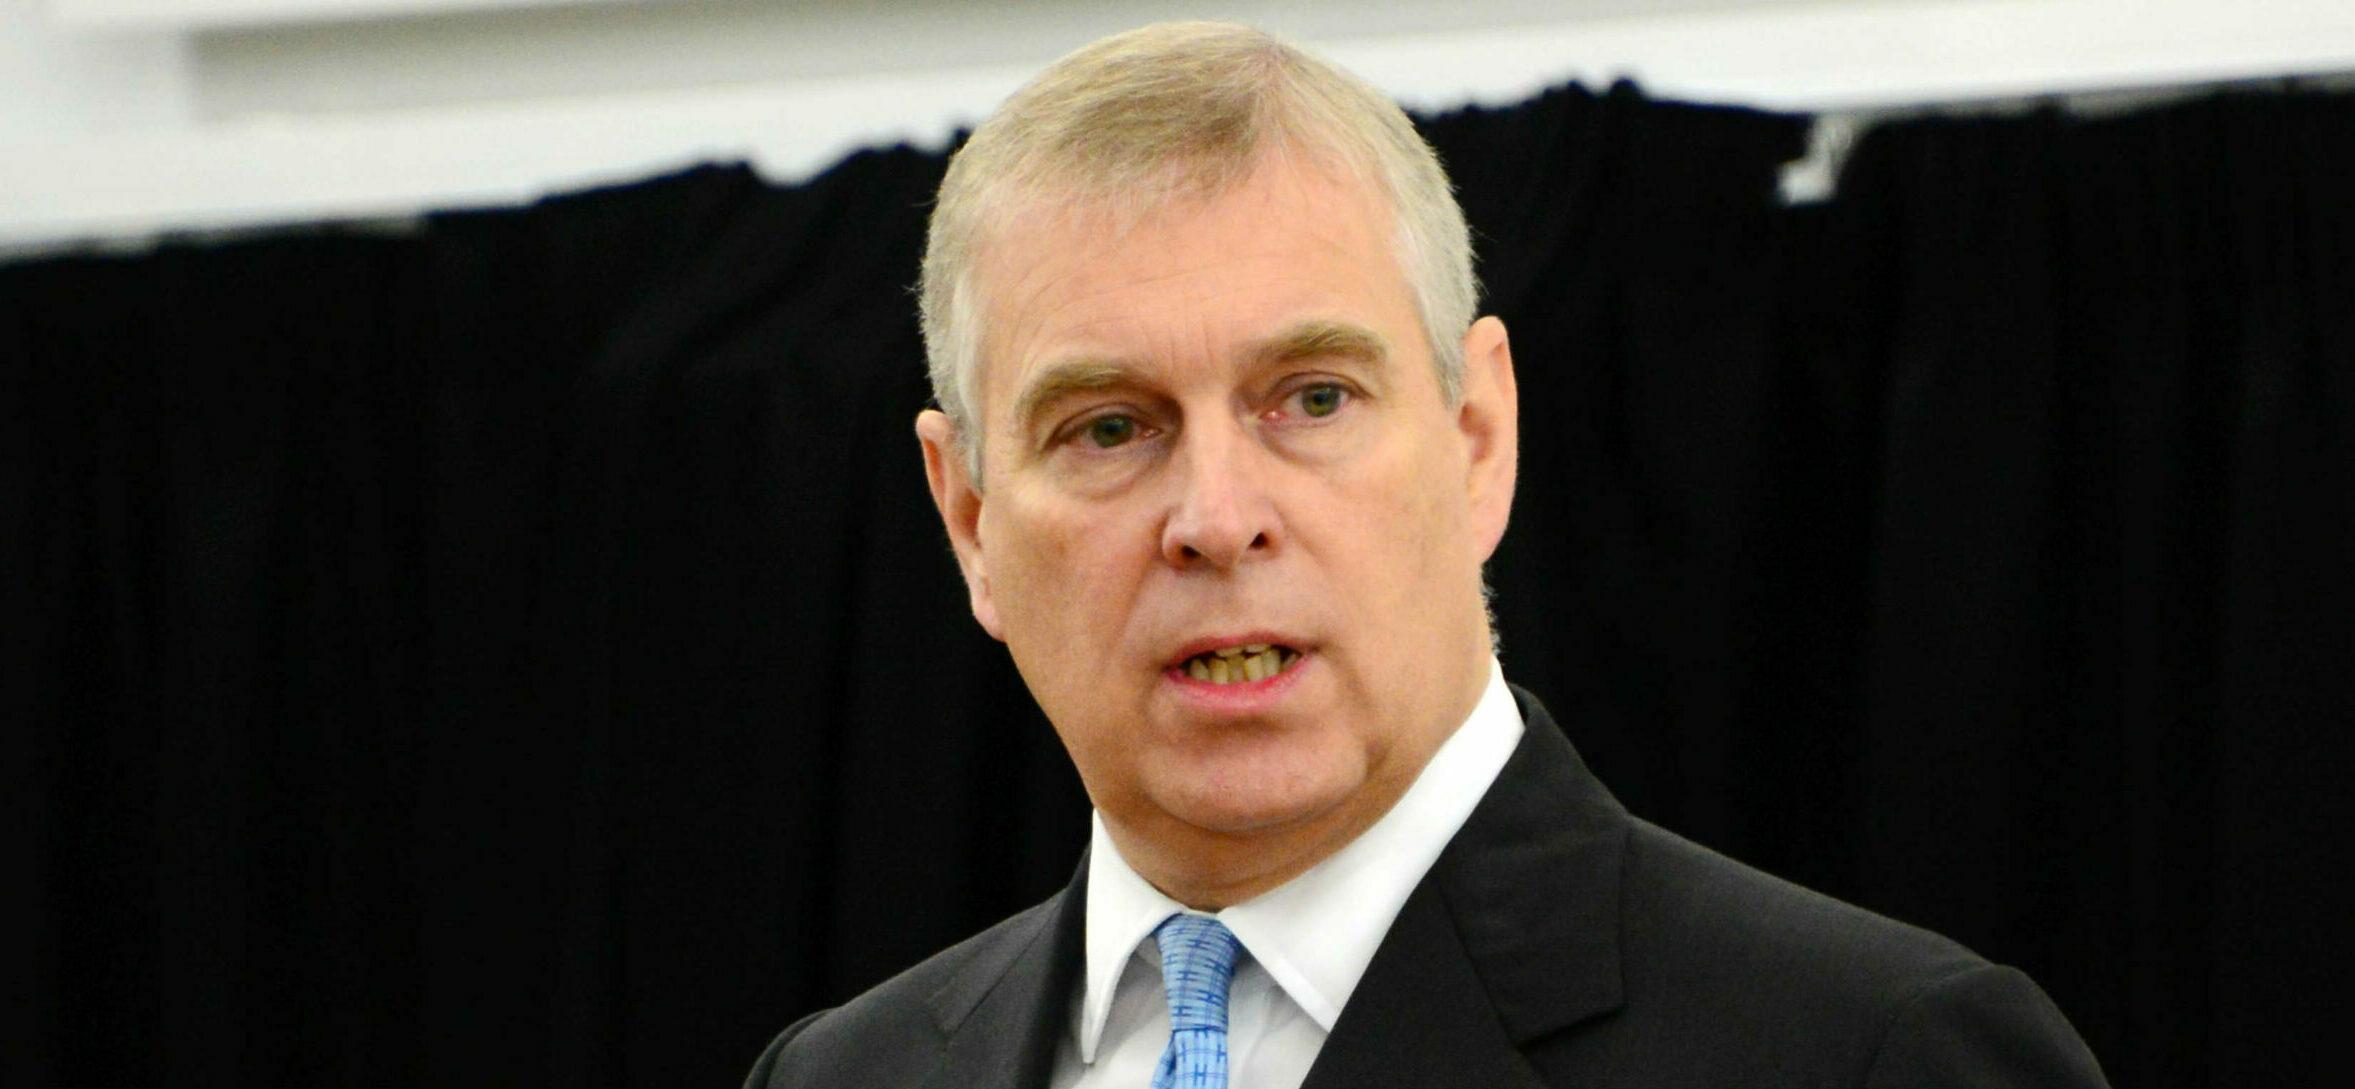 Prince Andrew Has Allegedly Consulted King Charles III To Get Back His HRH Title